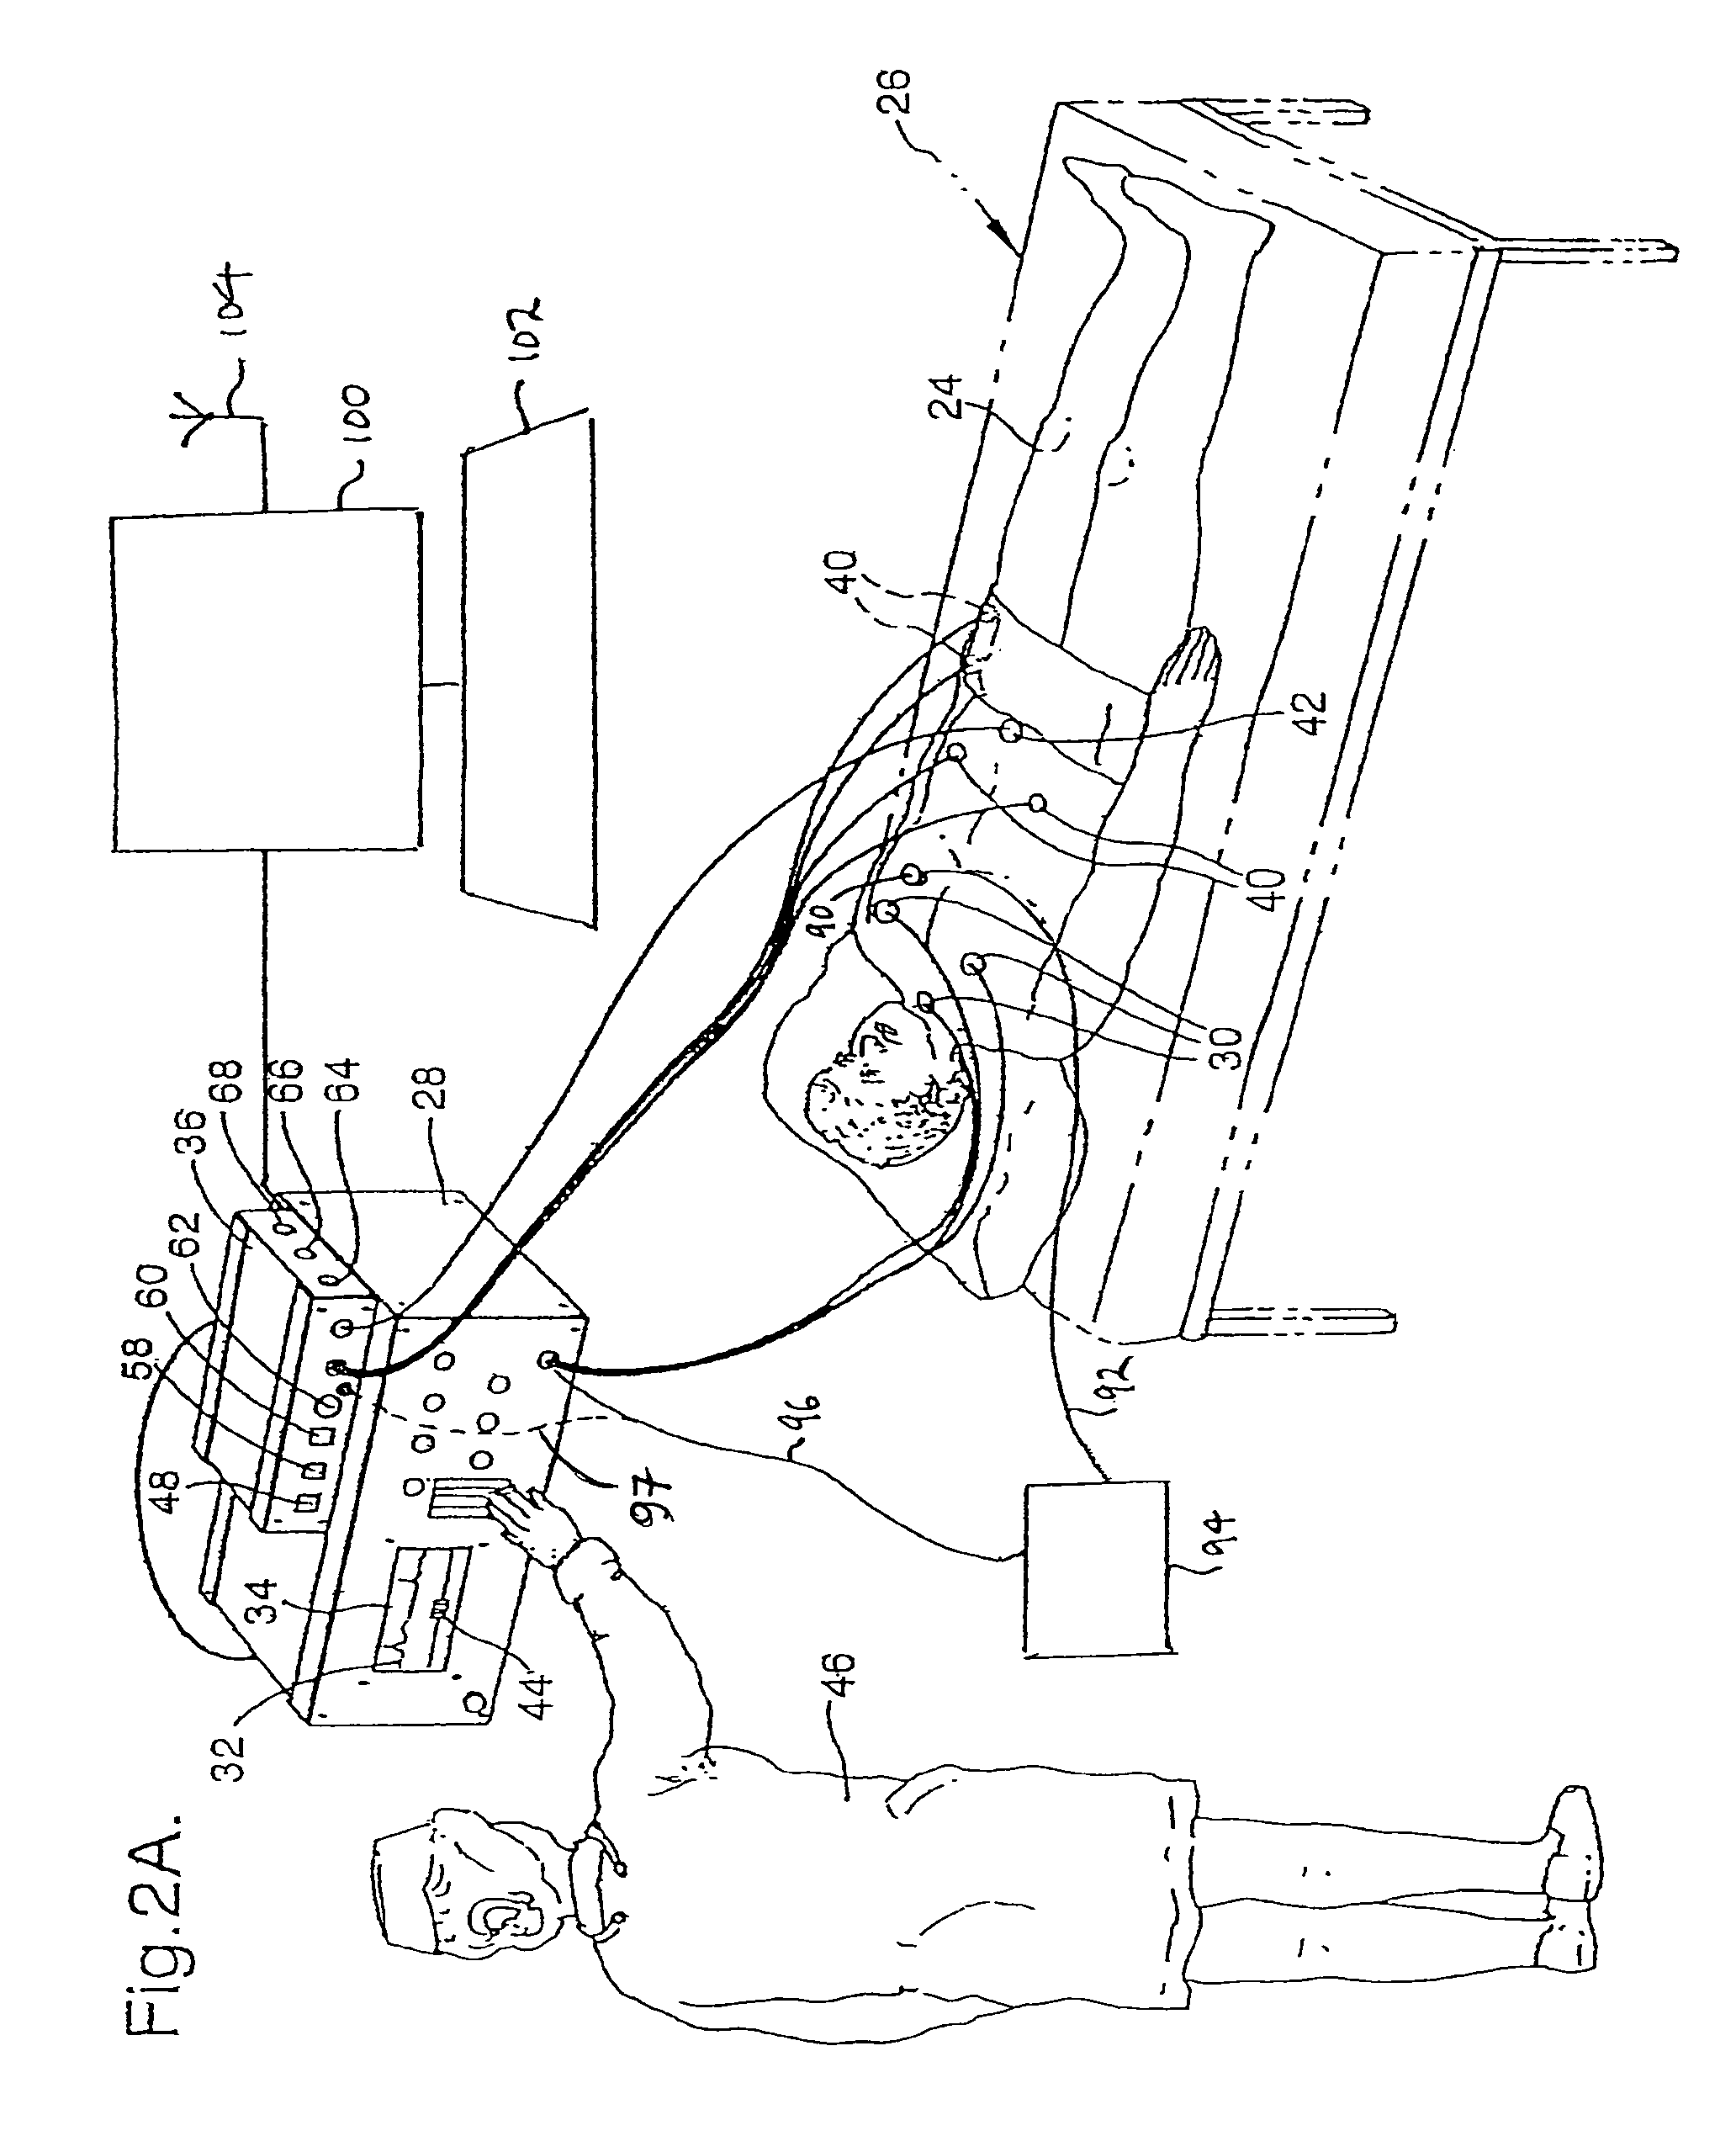 Counter pulsation electrotherapy apparatus for treating a person or a mammal